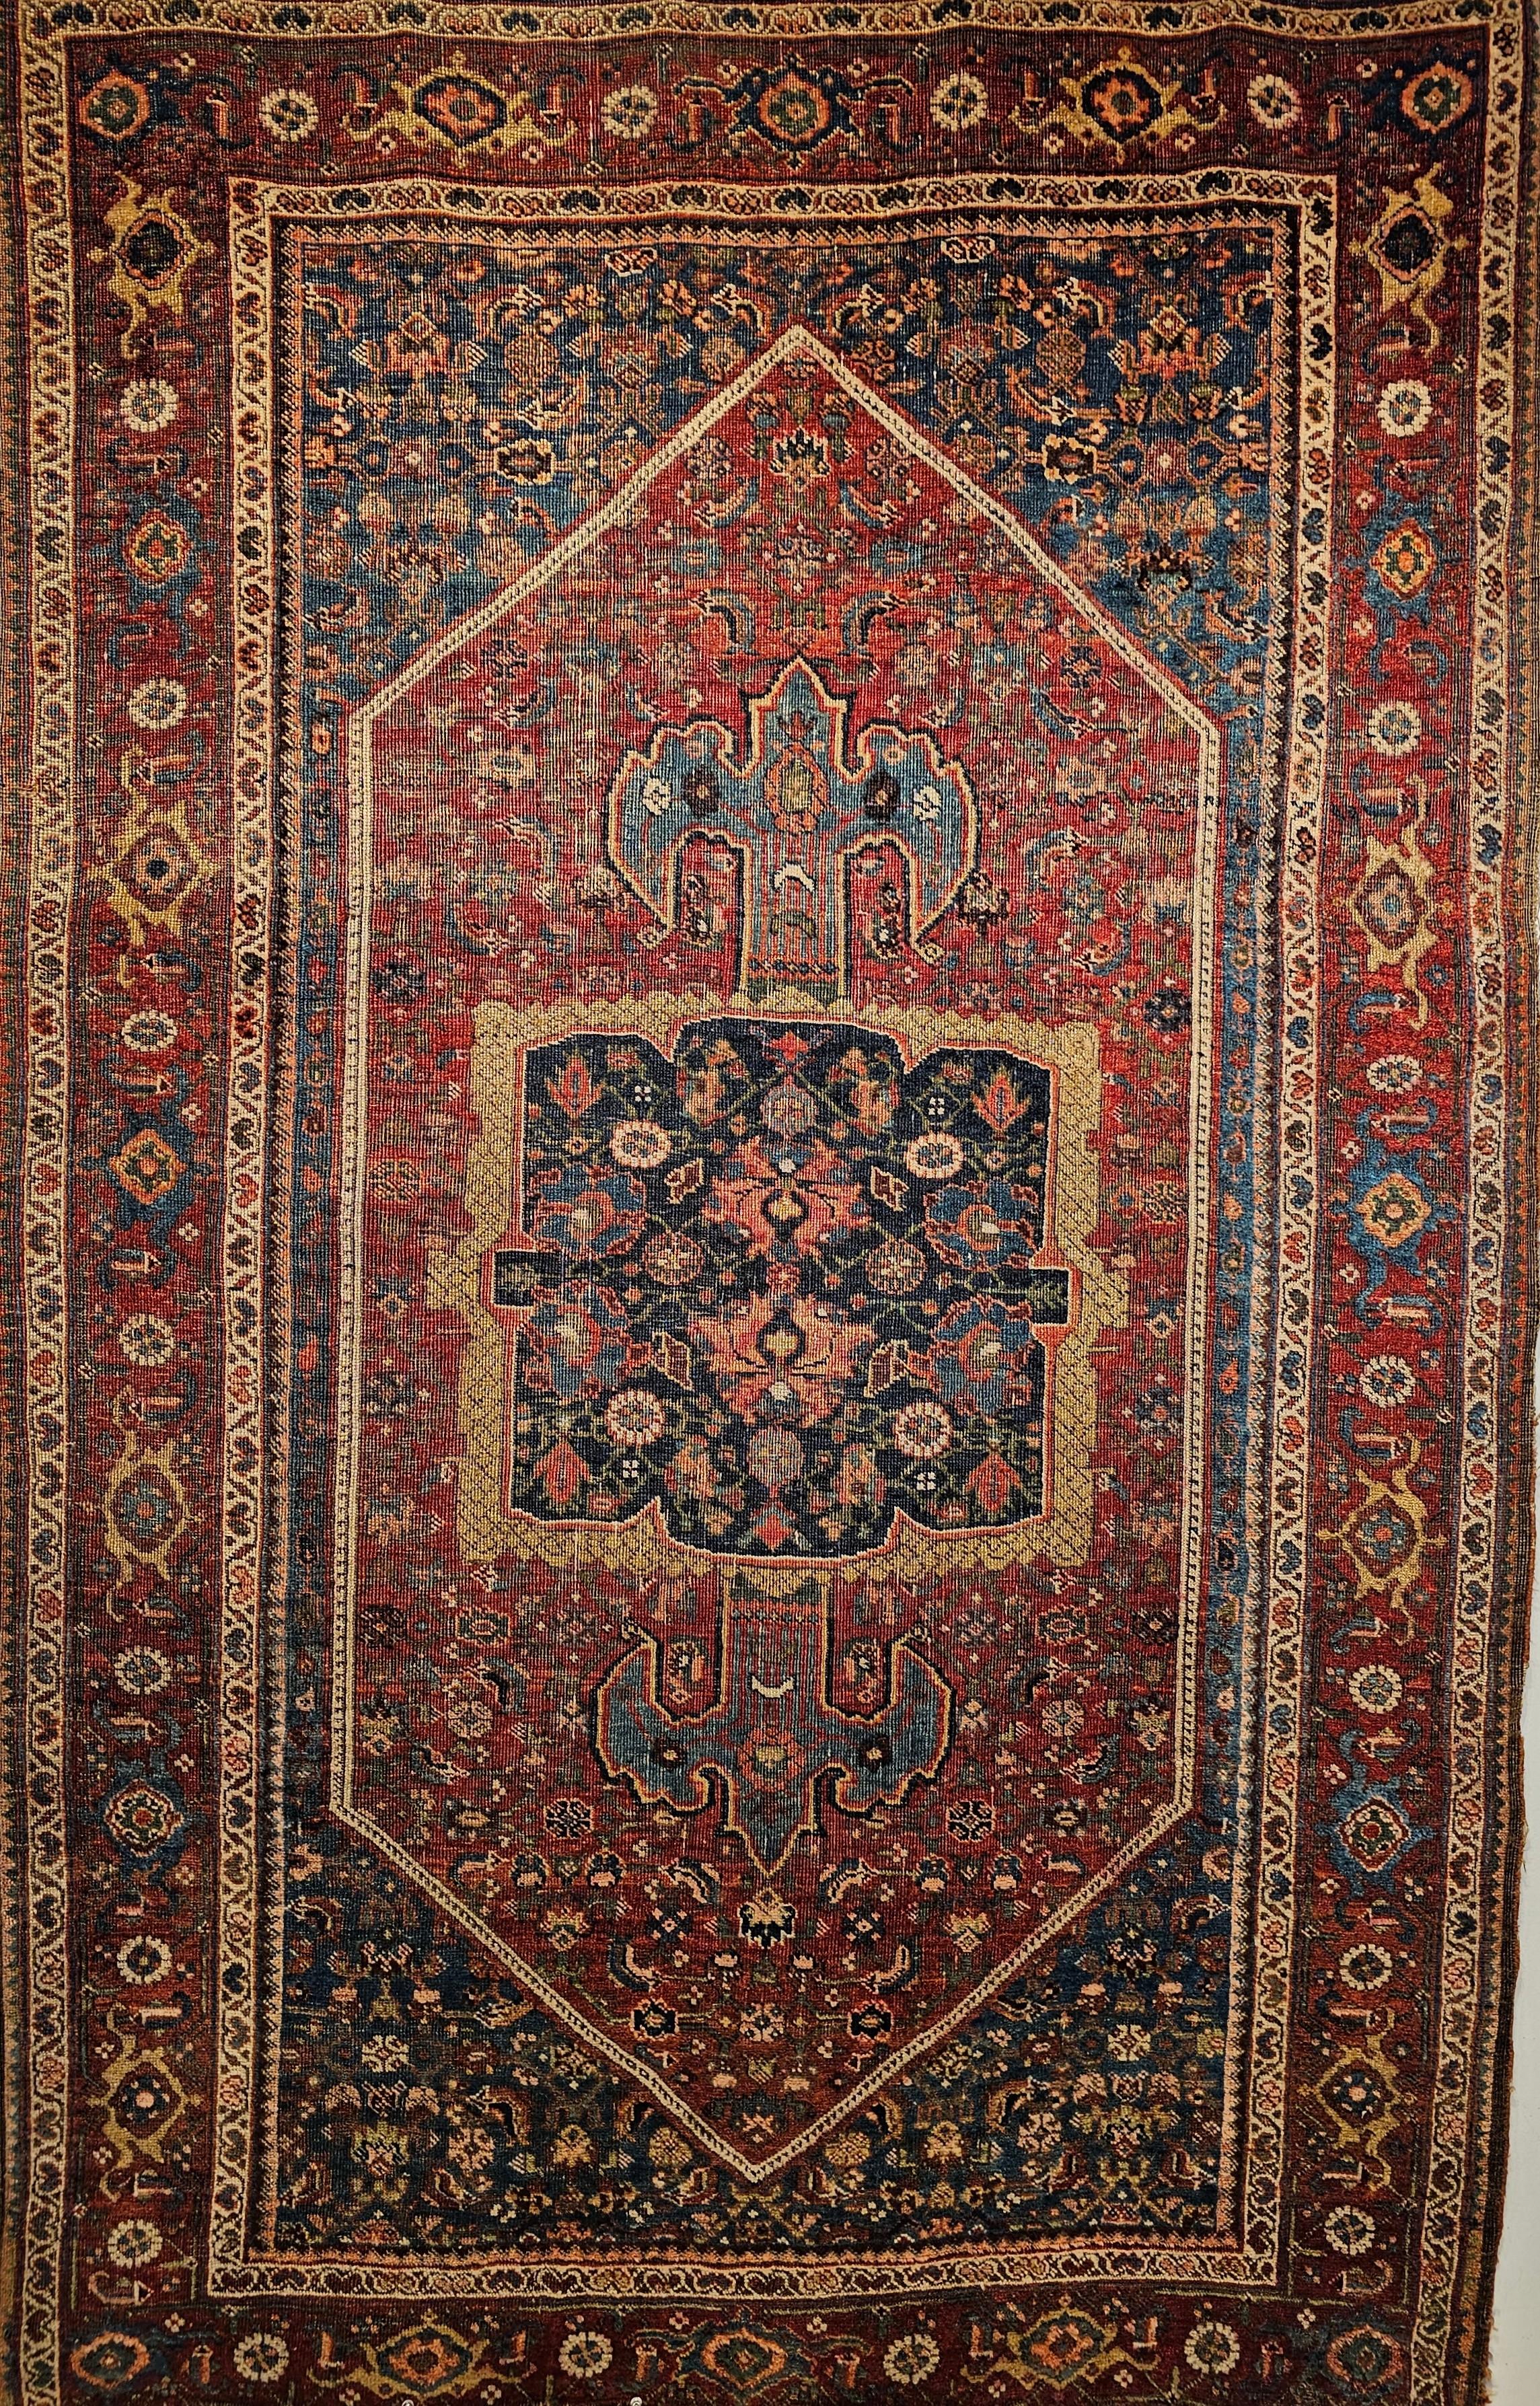 Beautiful 19th century Persian Bidjar area rug with a medallion design in a Herati geometric pattern in burgundy, French blue, and navy blue colors.   The rug has a combination of an abrash French blue and rich burgundy field colors.    The center